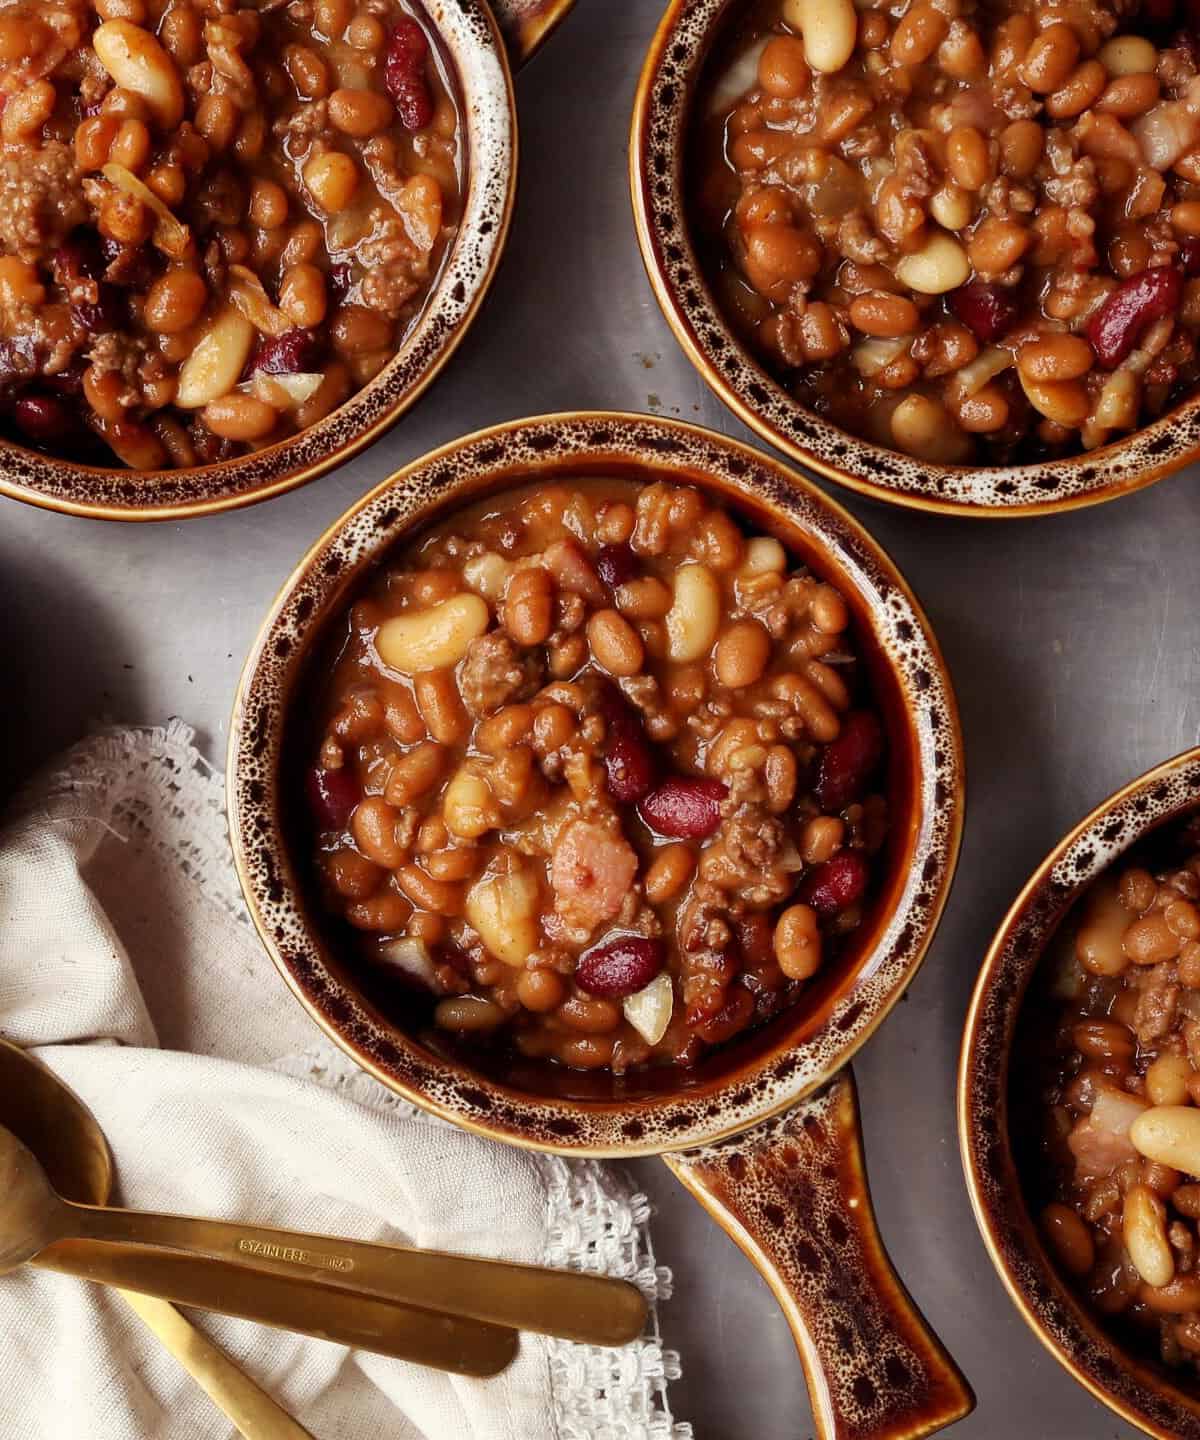  You'll love how easy it is to make these beans, whether you're an experienced BBQ chef or just starting out.